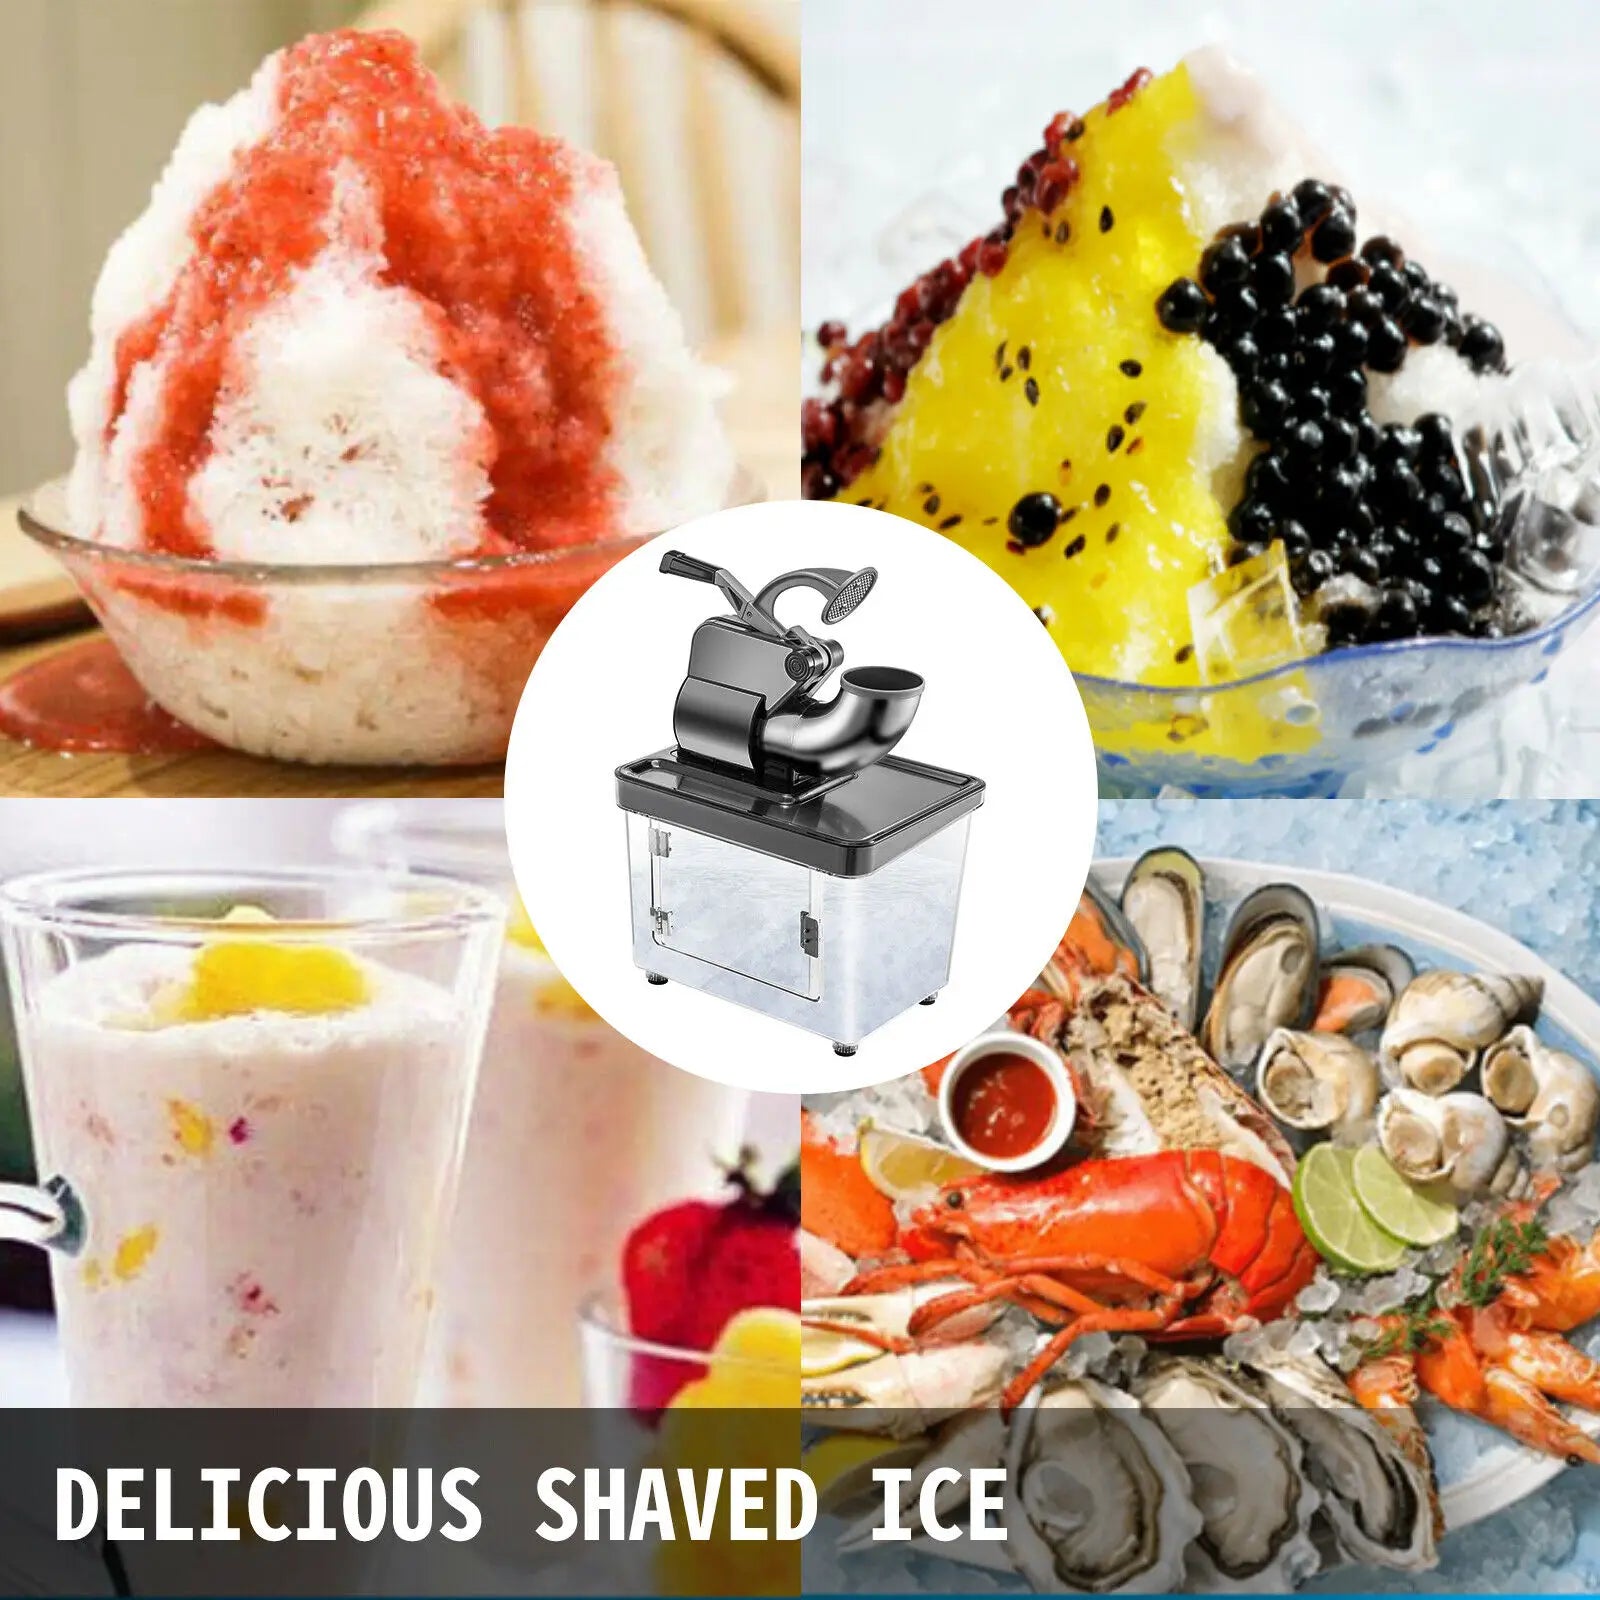 Electric Snow Cone Machine Ice Shaver Crusher Granizing Glass Blender Mixer Chopper Stainless Steel Cool Colder Commercial 220V